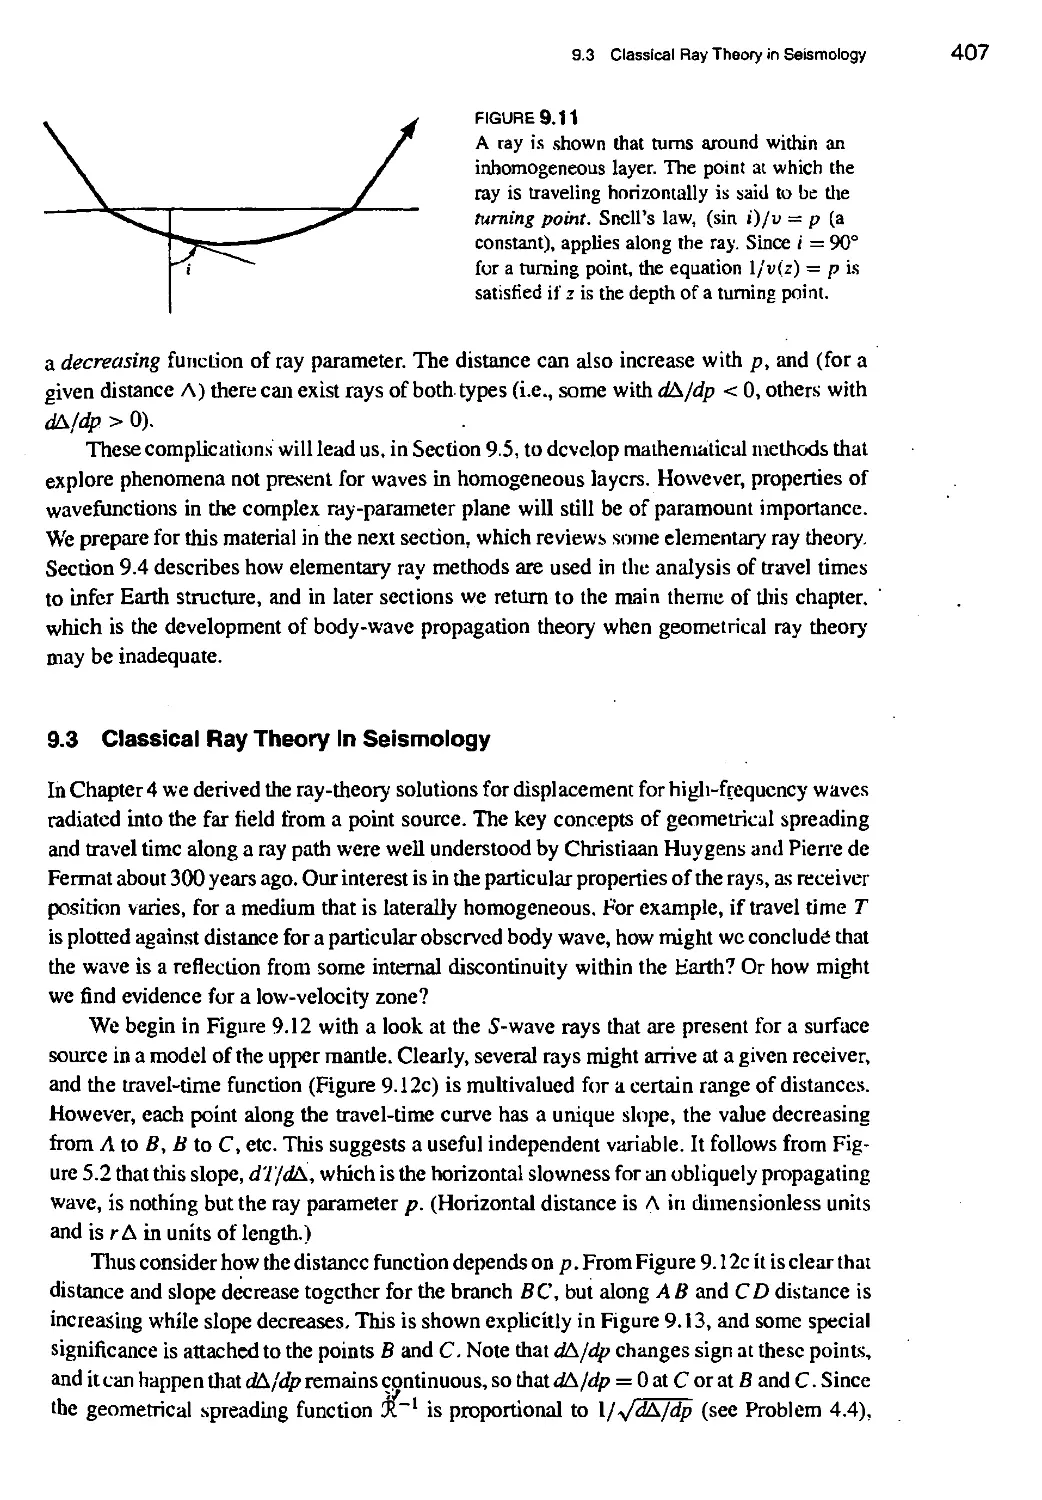 9.3 Classical Ray Theory in Seismology